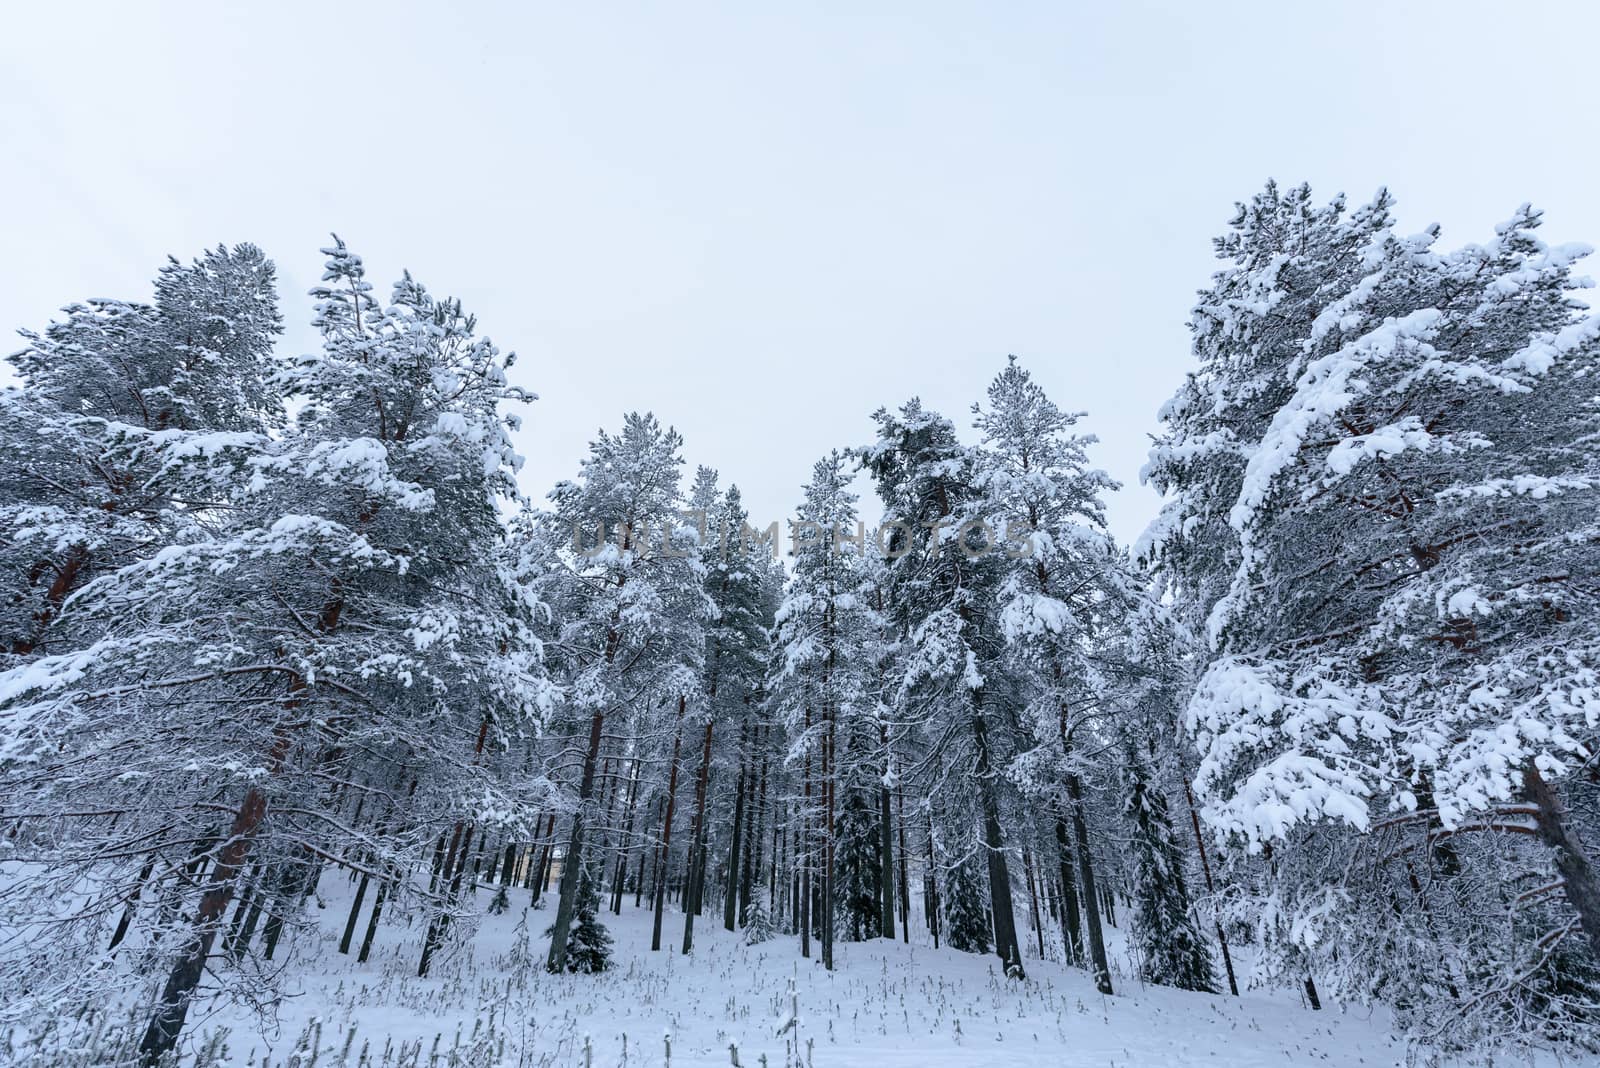 The forest has covered with heavy snow and bad weather sky in winter season at Lapland, Finland.